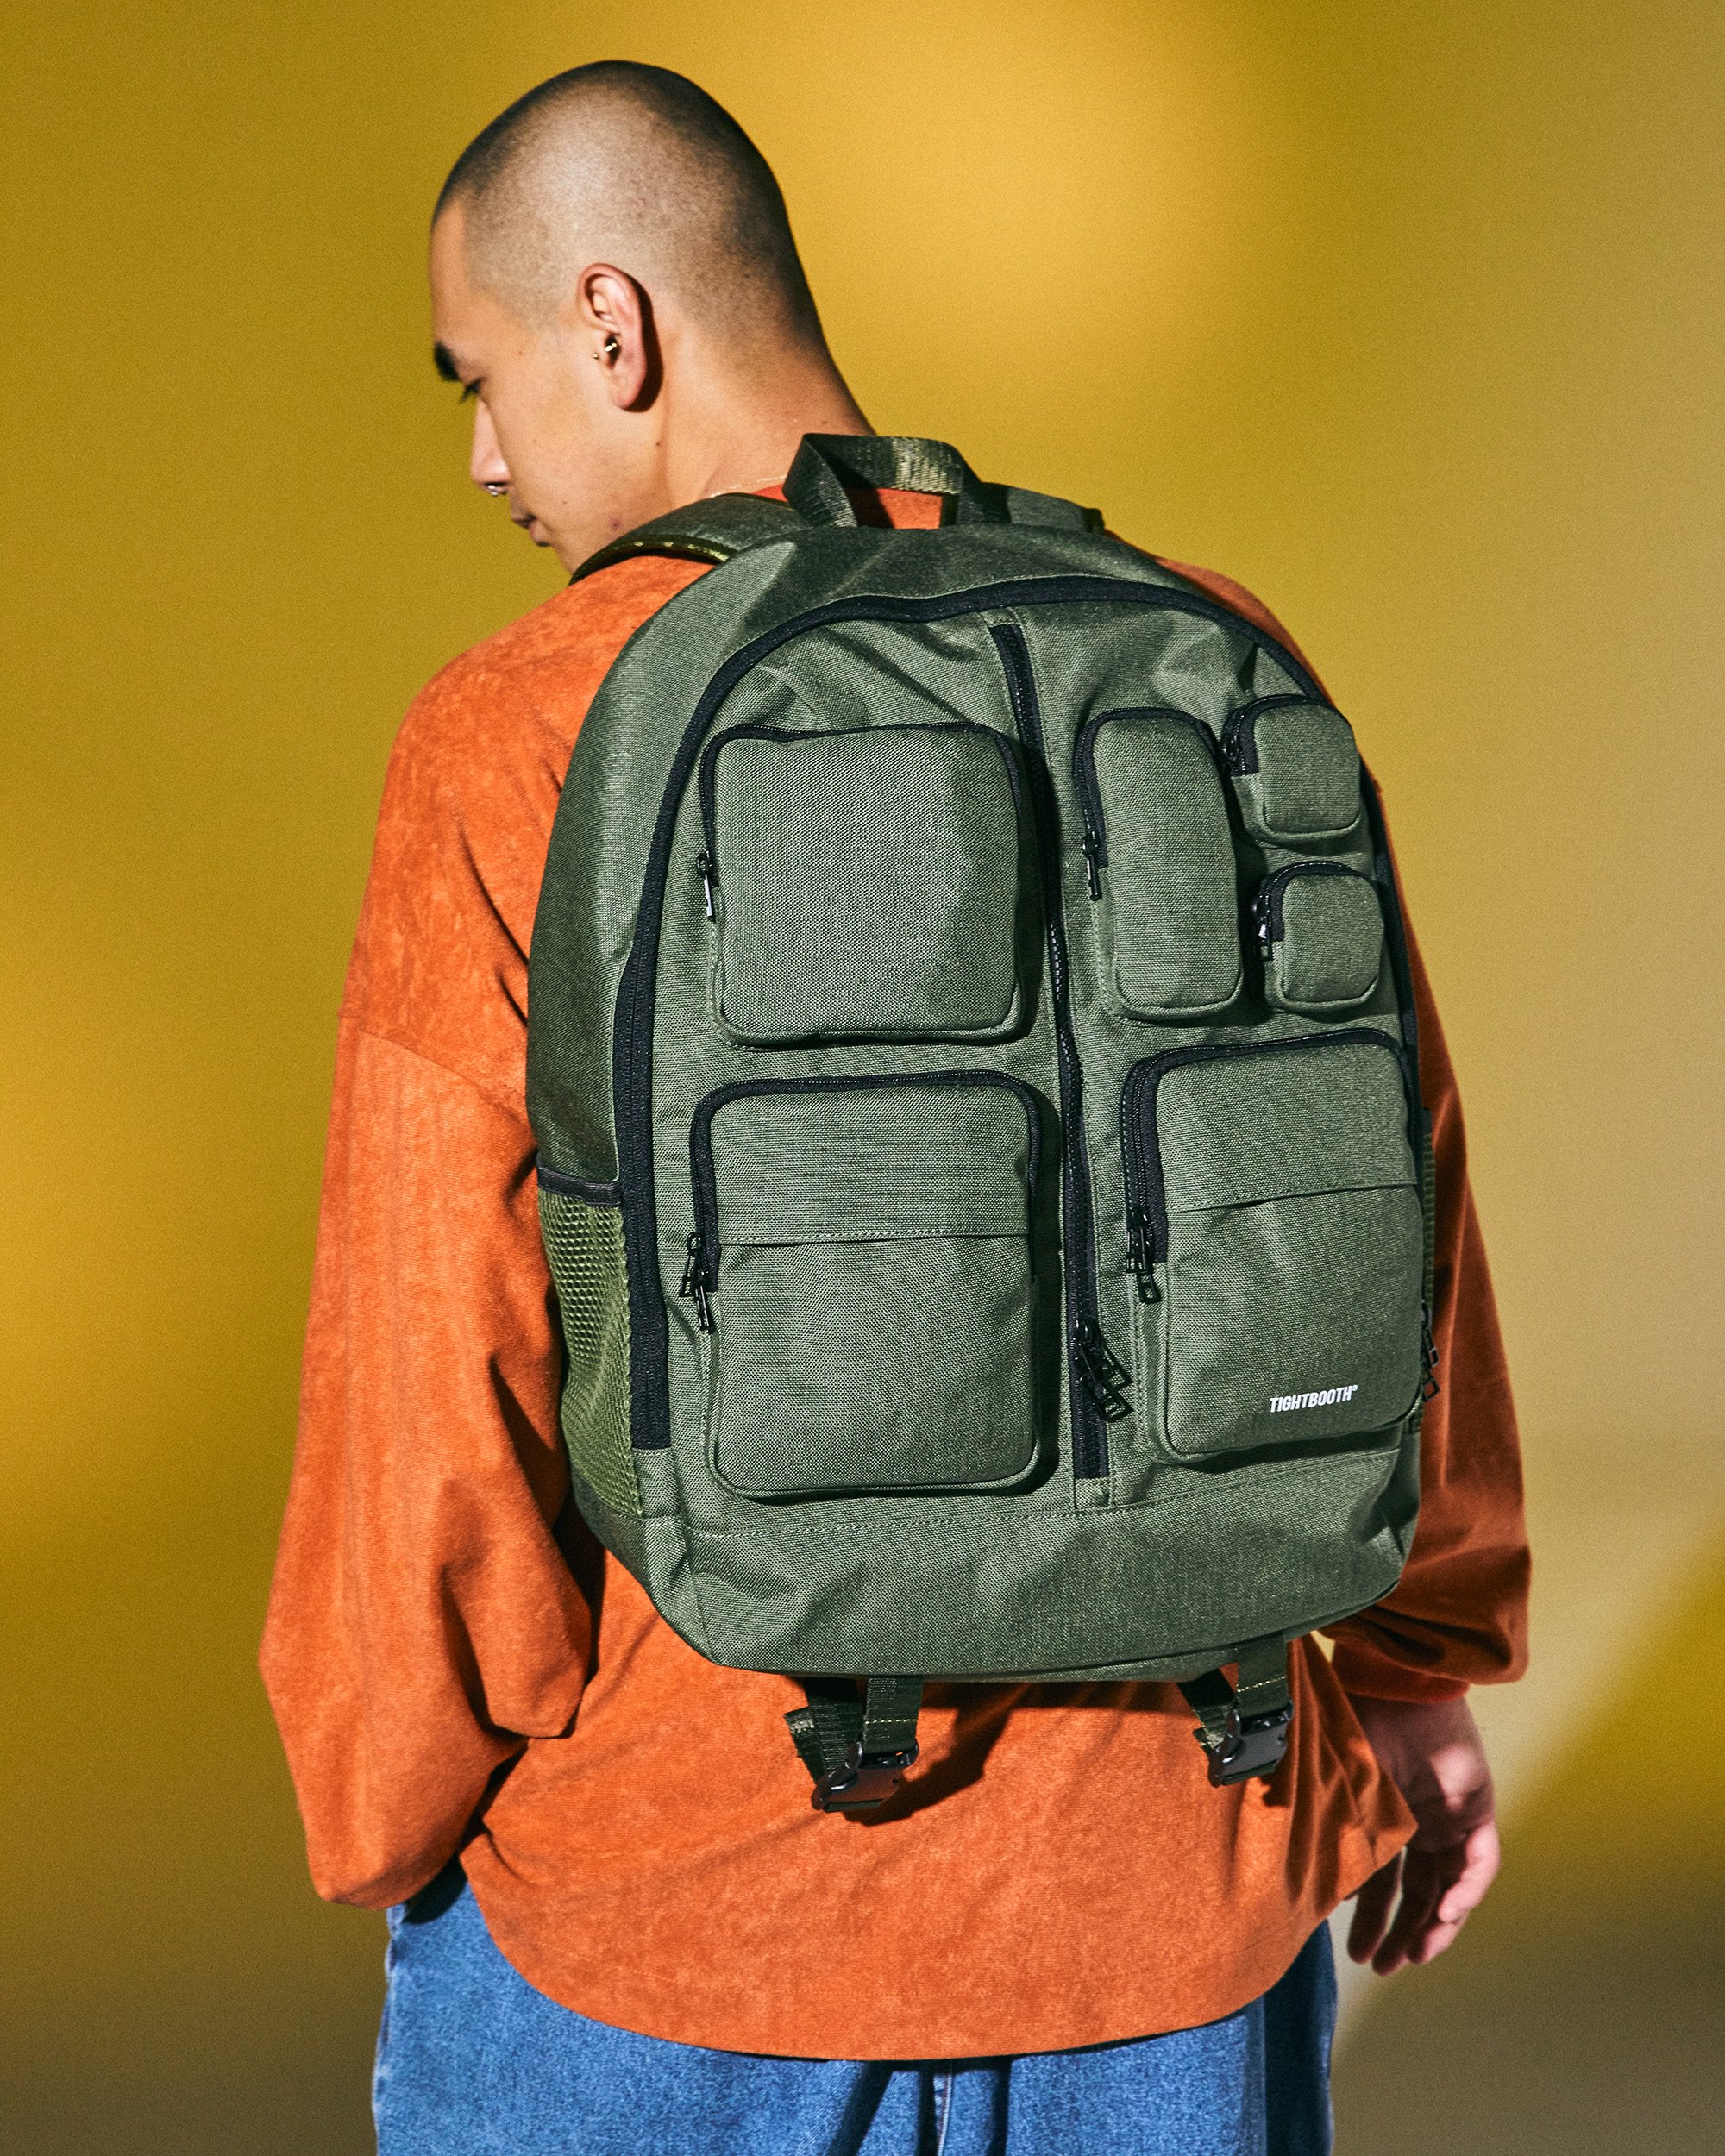 TBPR QUILT BACKPACK タイトブース キルト バックパック